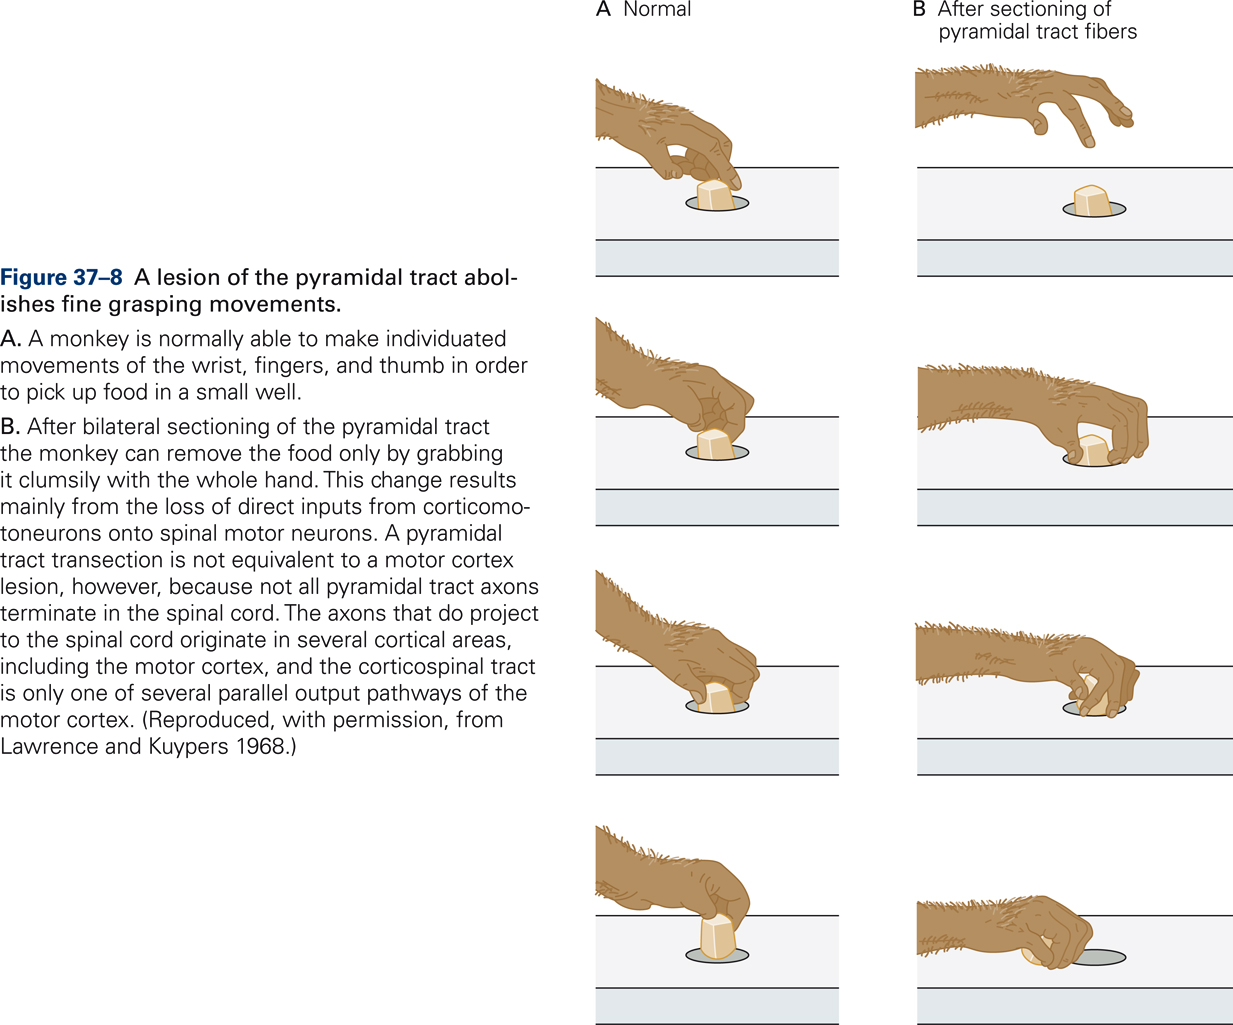 Lesions of the corticospinal tracts abolish fine finger movements.